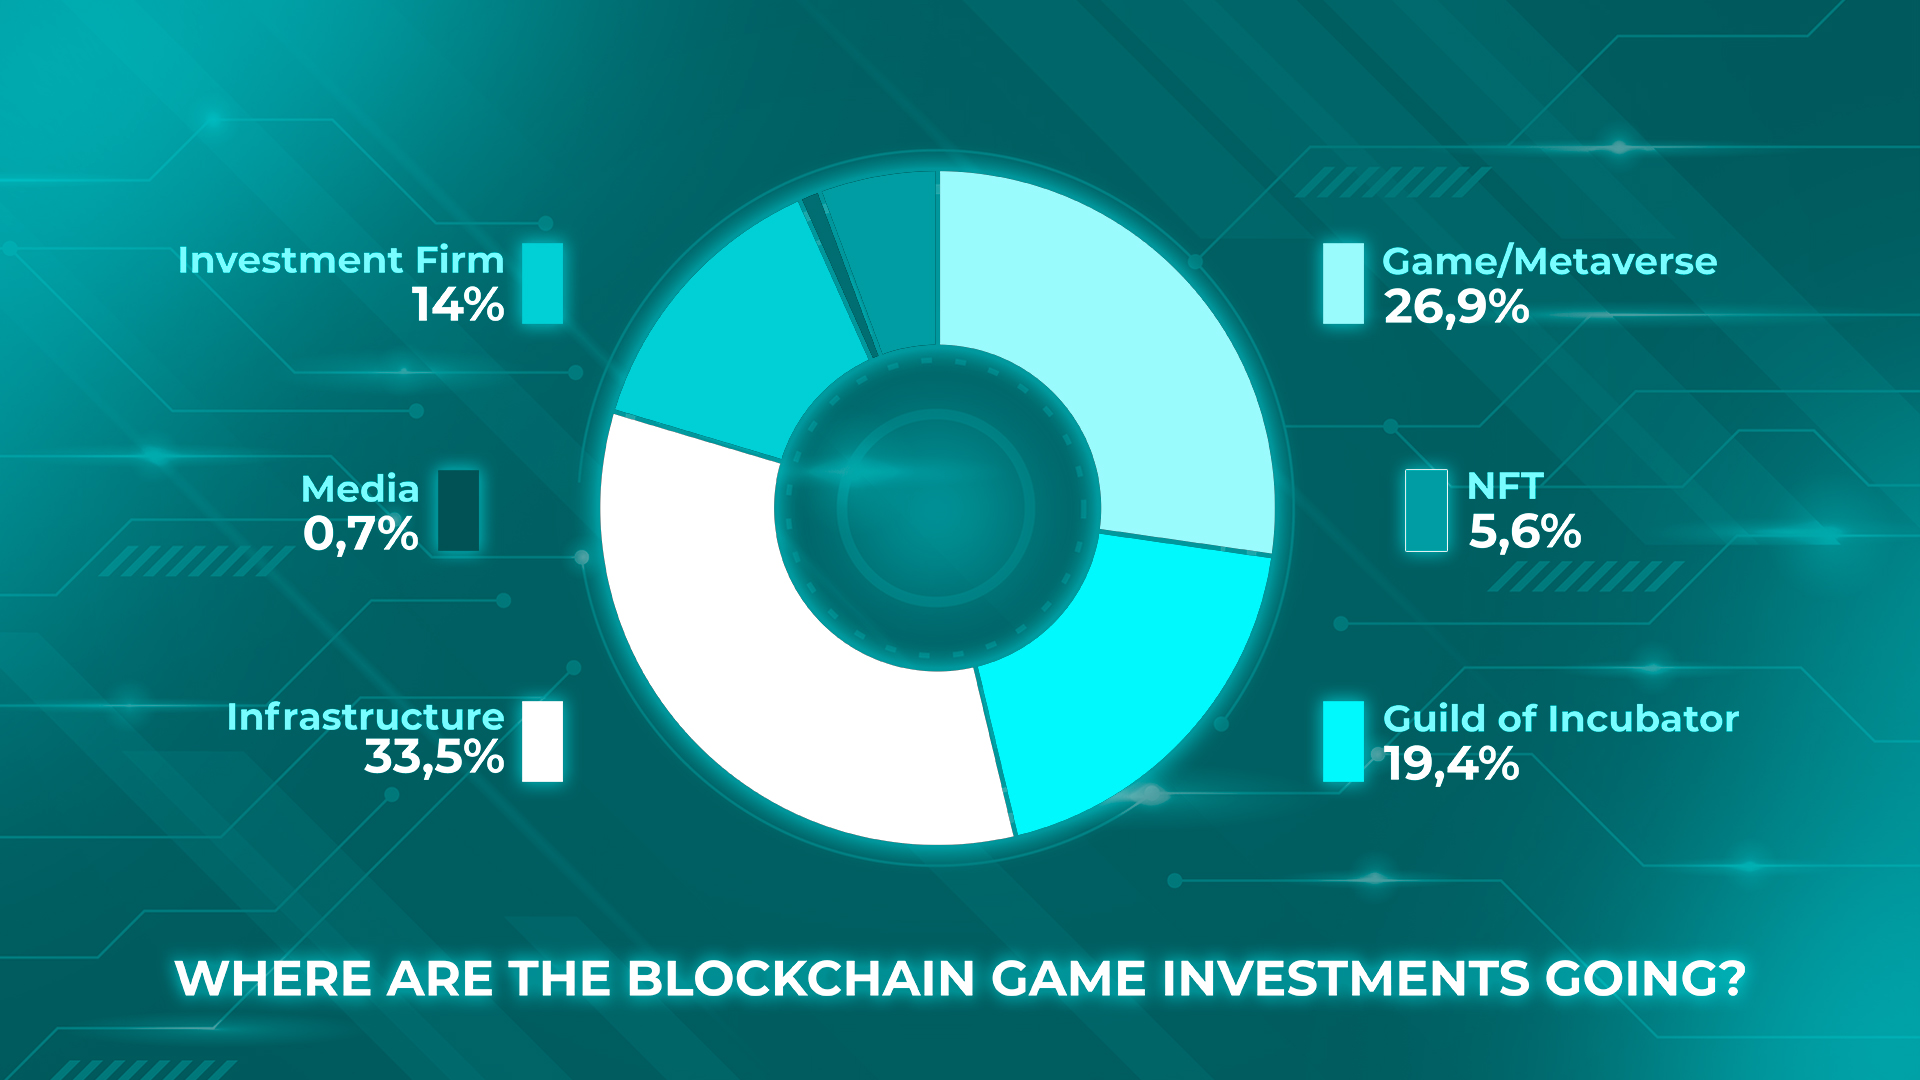 Percent of the blockchain investments